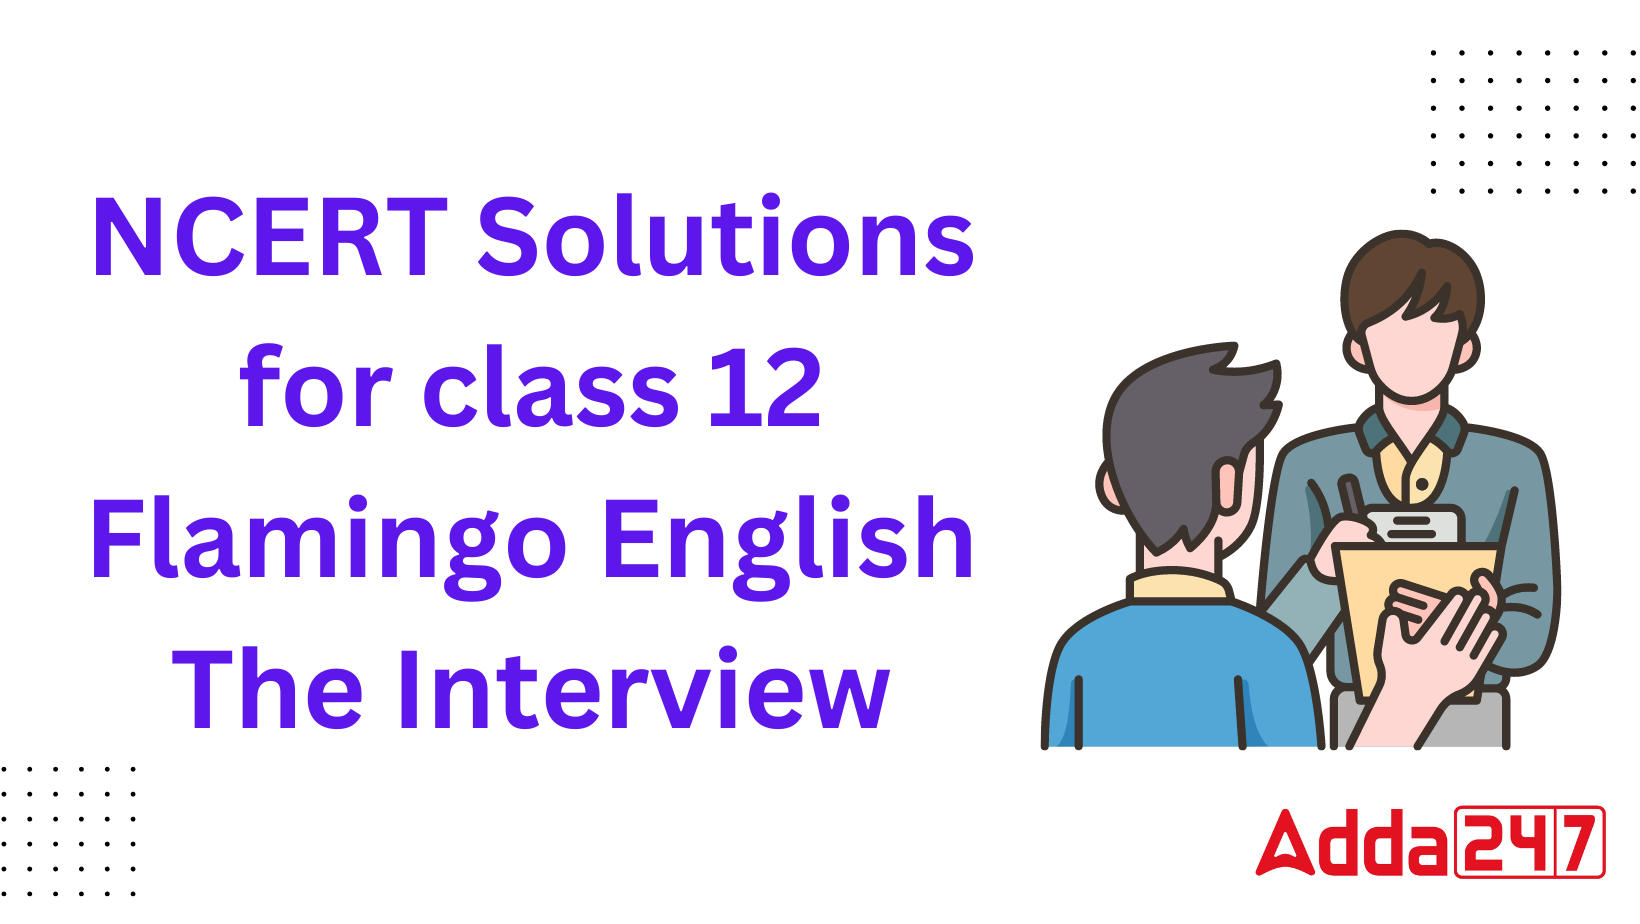 NCERT Solutions for class 12 Flamingo English The Interview